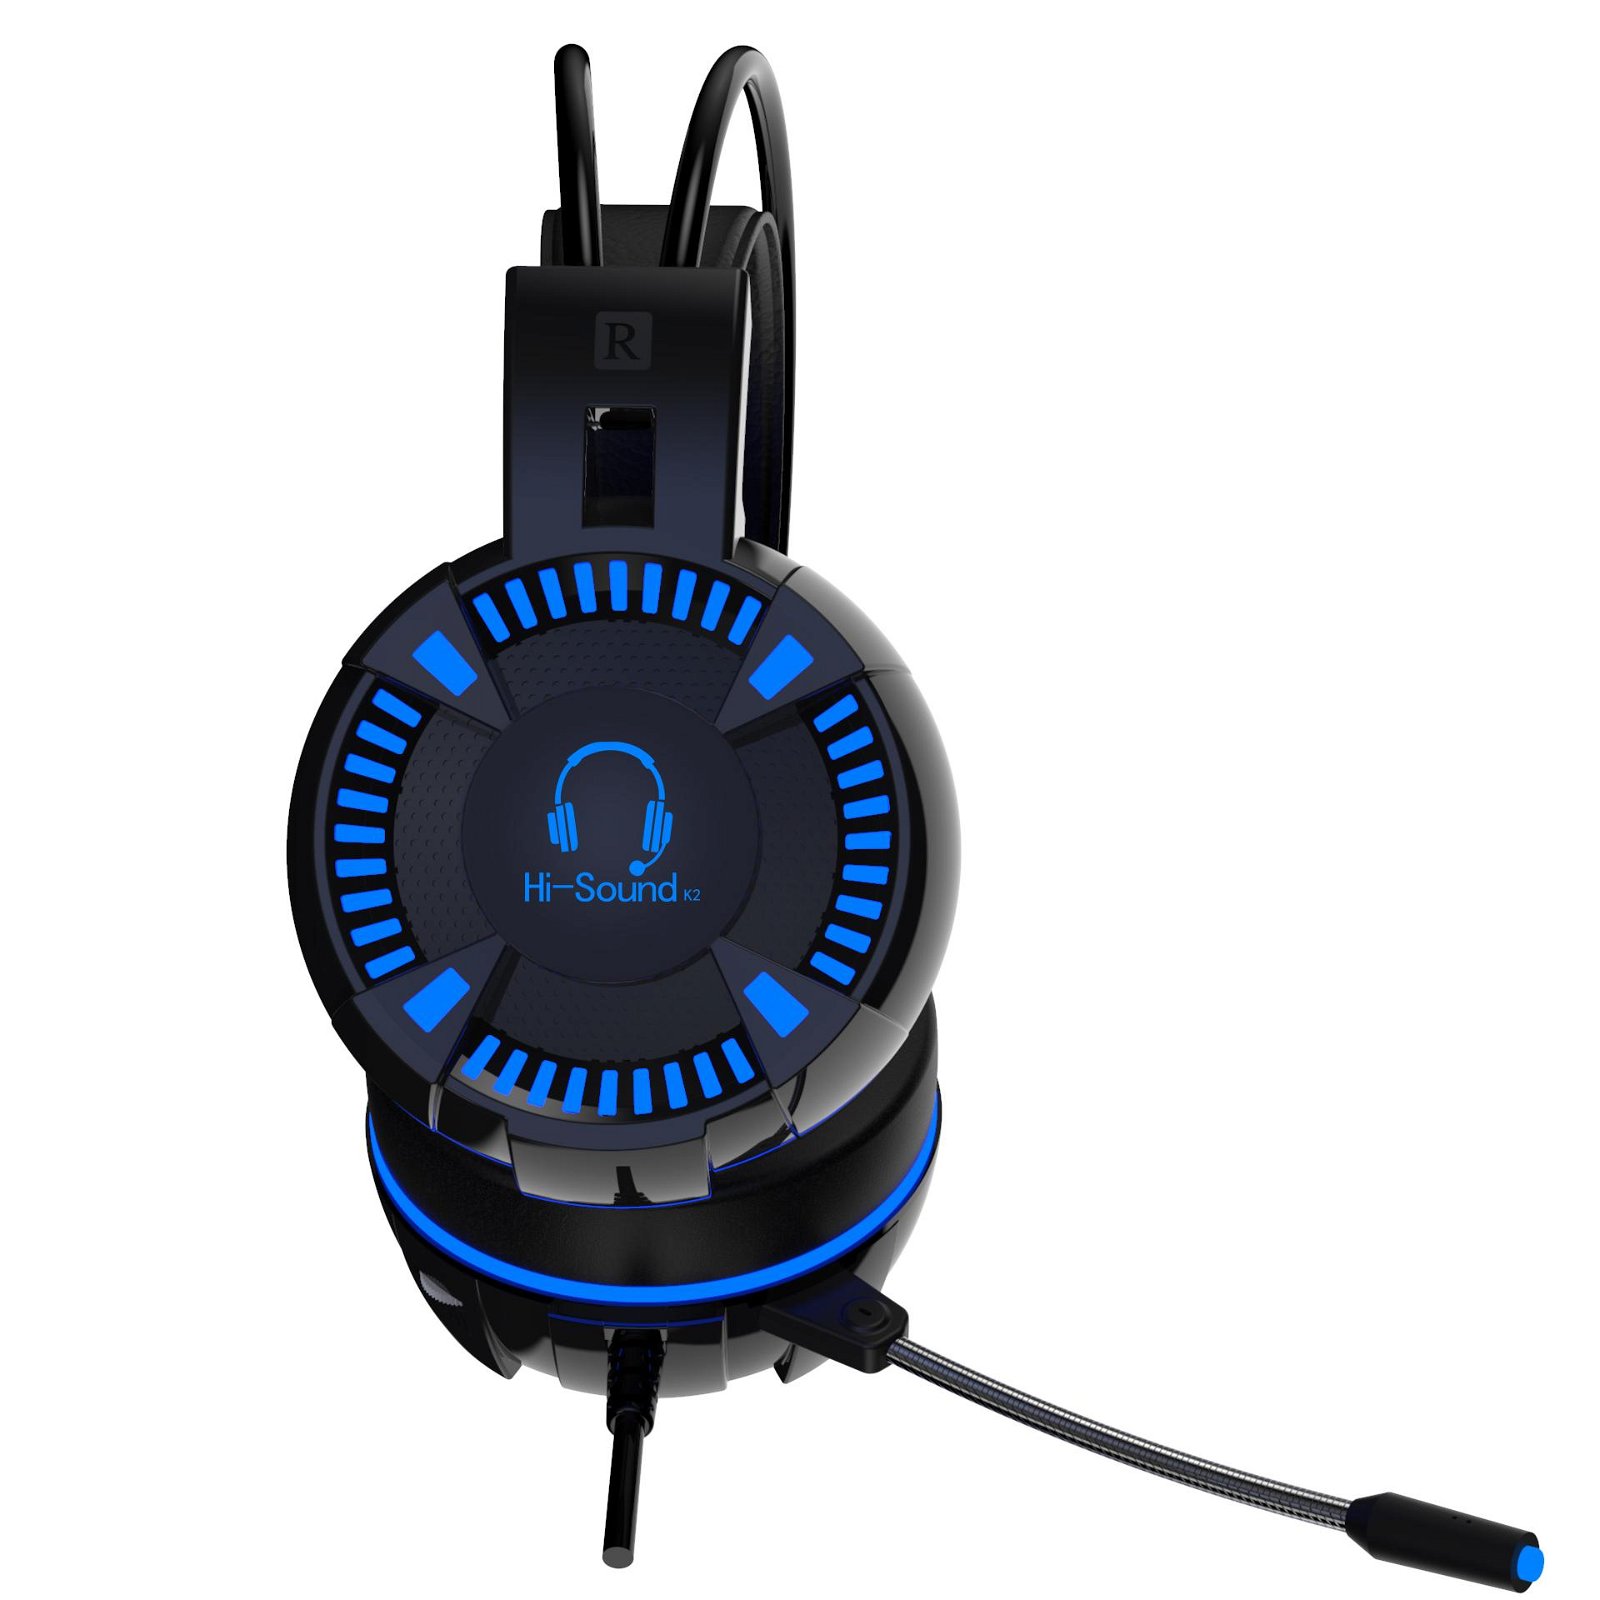 Hi-sound LED Cool Colorful LED Gaming Headset for gamers 2